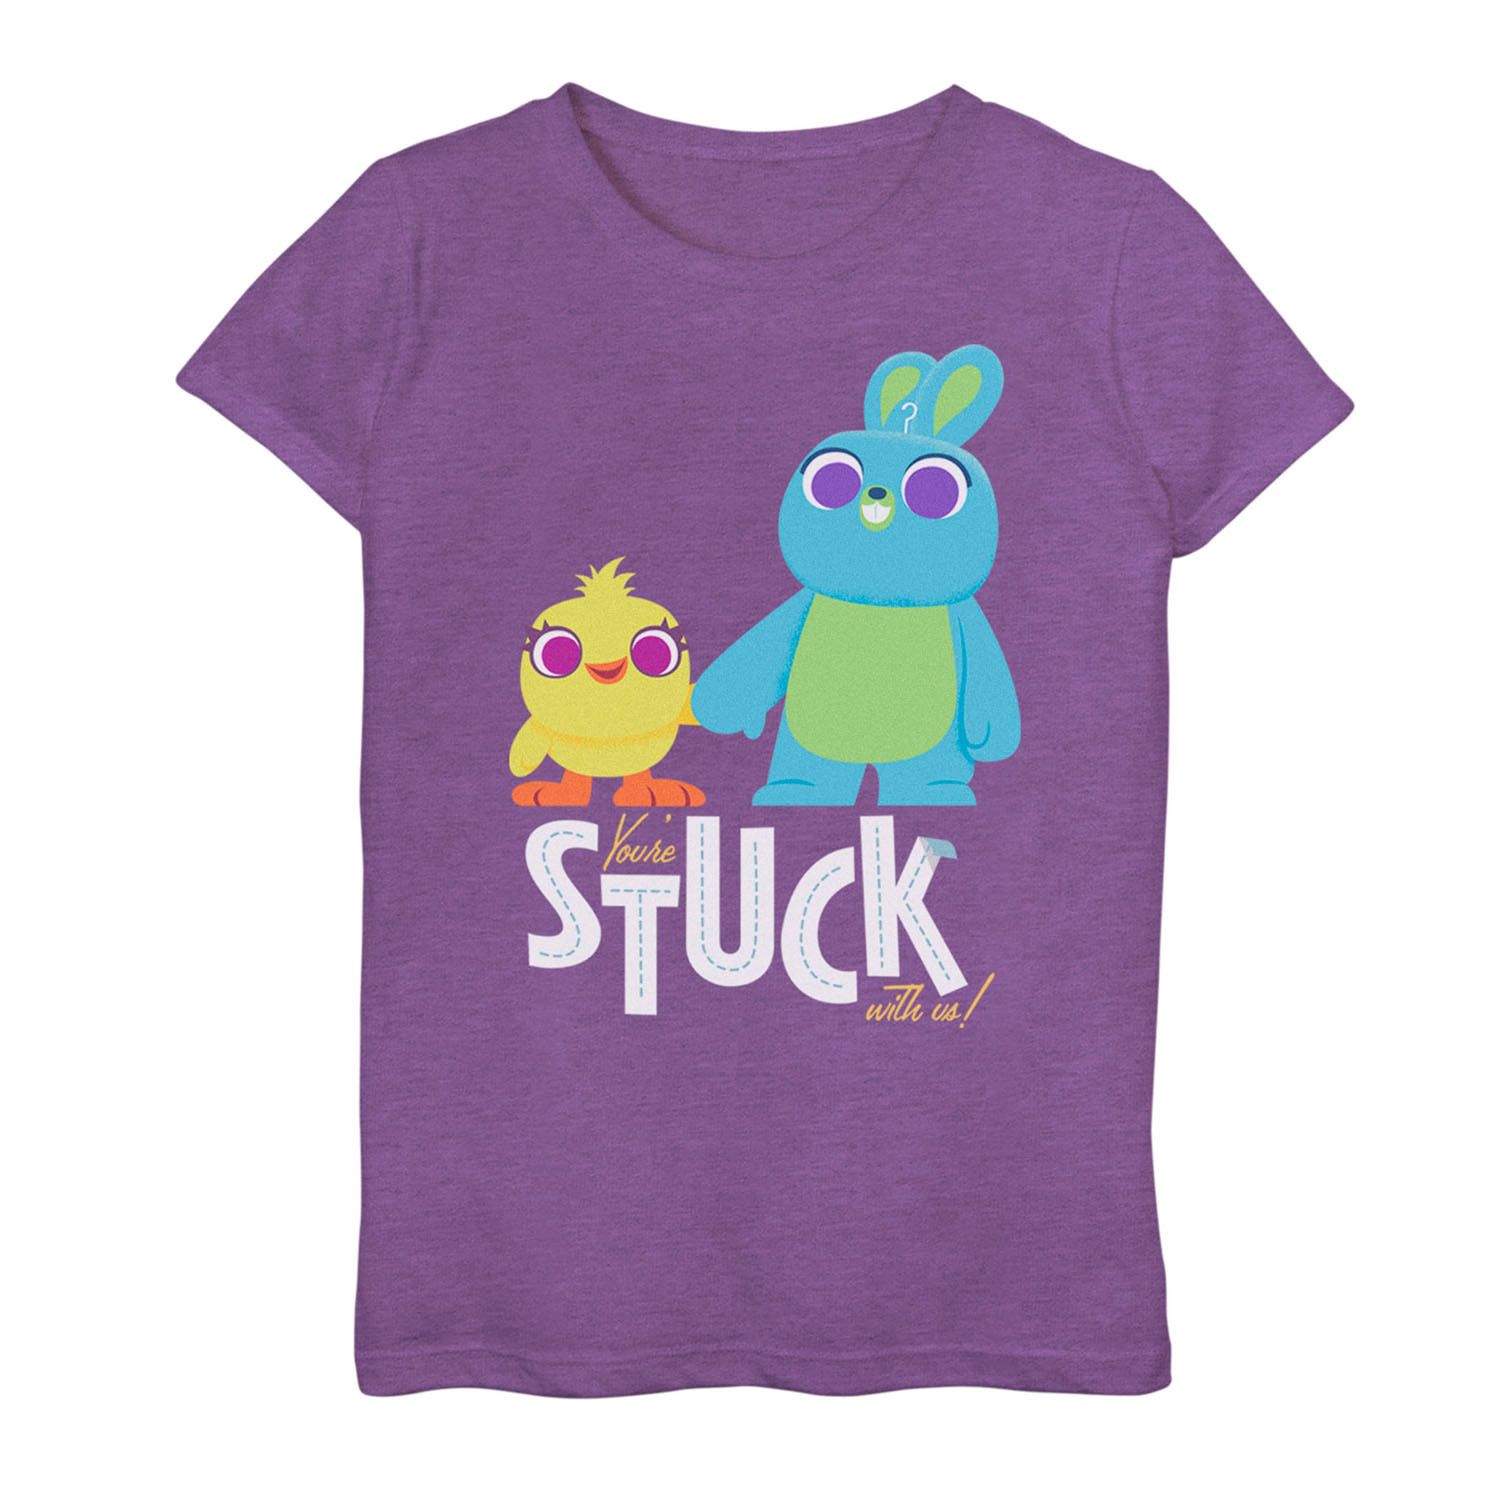 Image for Disney / Pixar Toy Story 4 Girls 7-16 Ducky & Bunny "Stuck With Us" Graphic Tee at Kohl's.